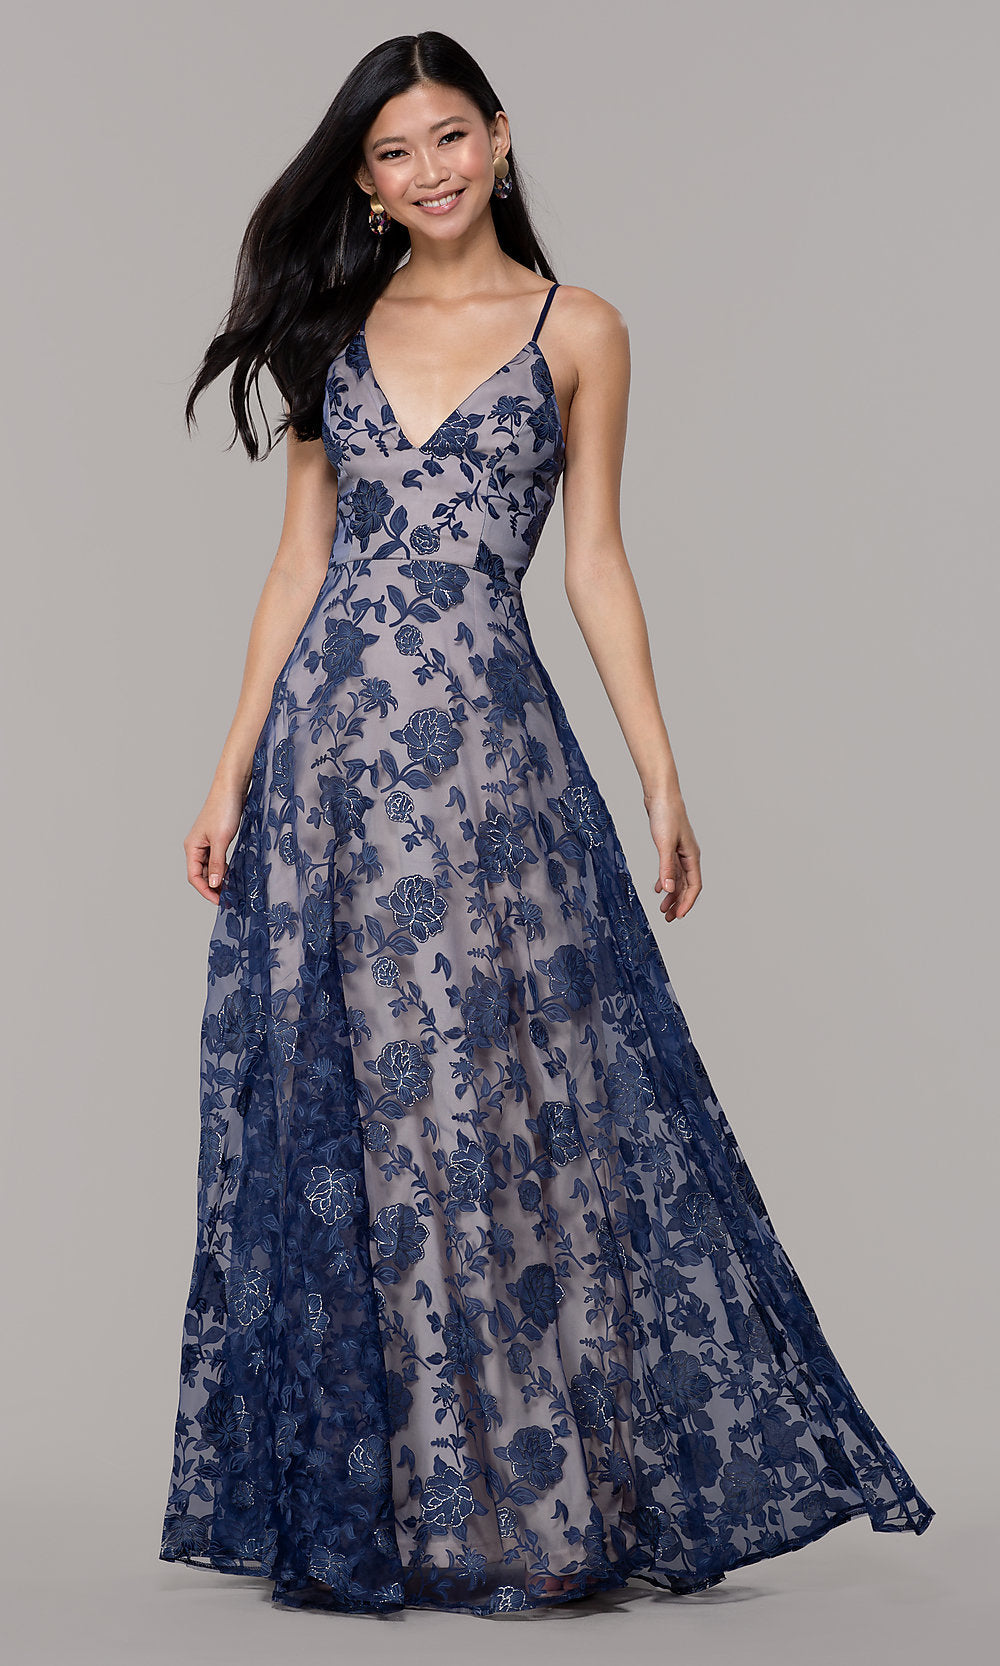  Long Formal Prom Dress with Glitter Floral Print